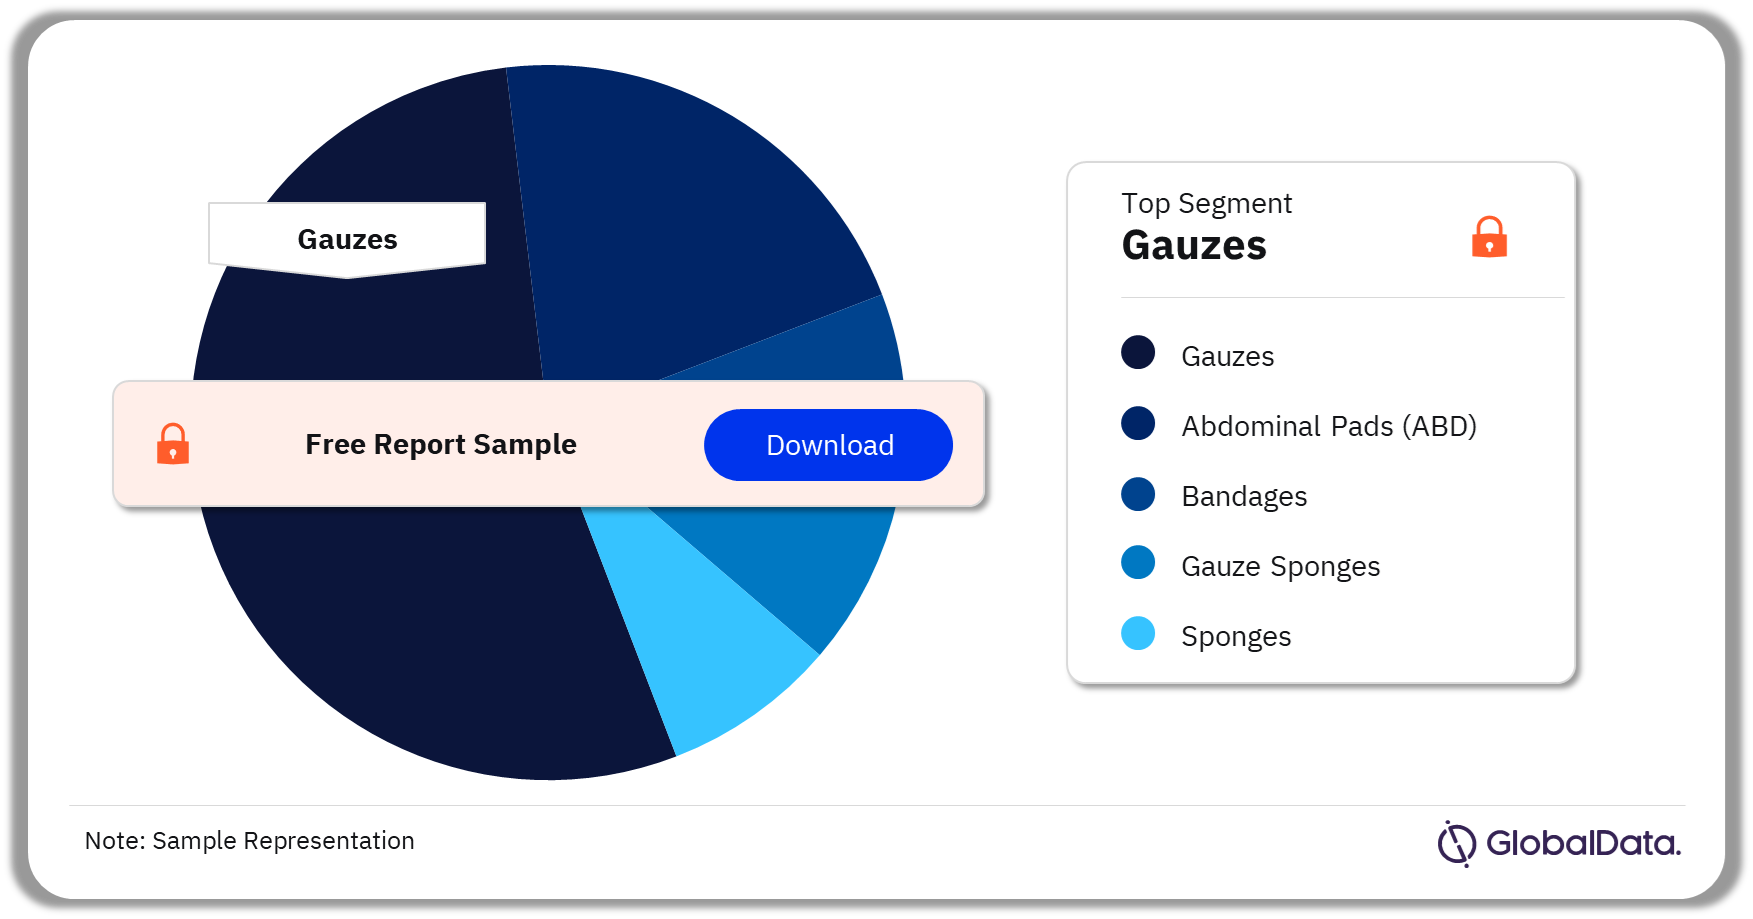 Traditional Wound Management Market Analysis by Segments, 2023 (%)